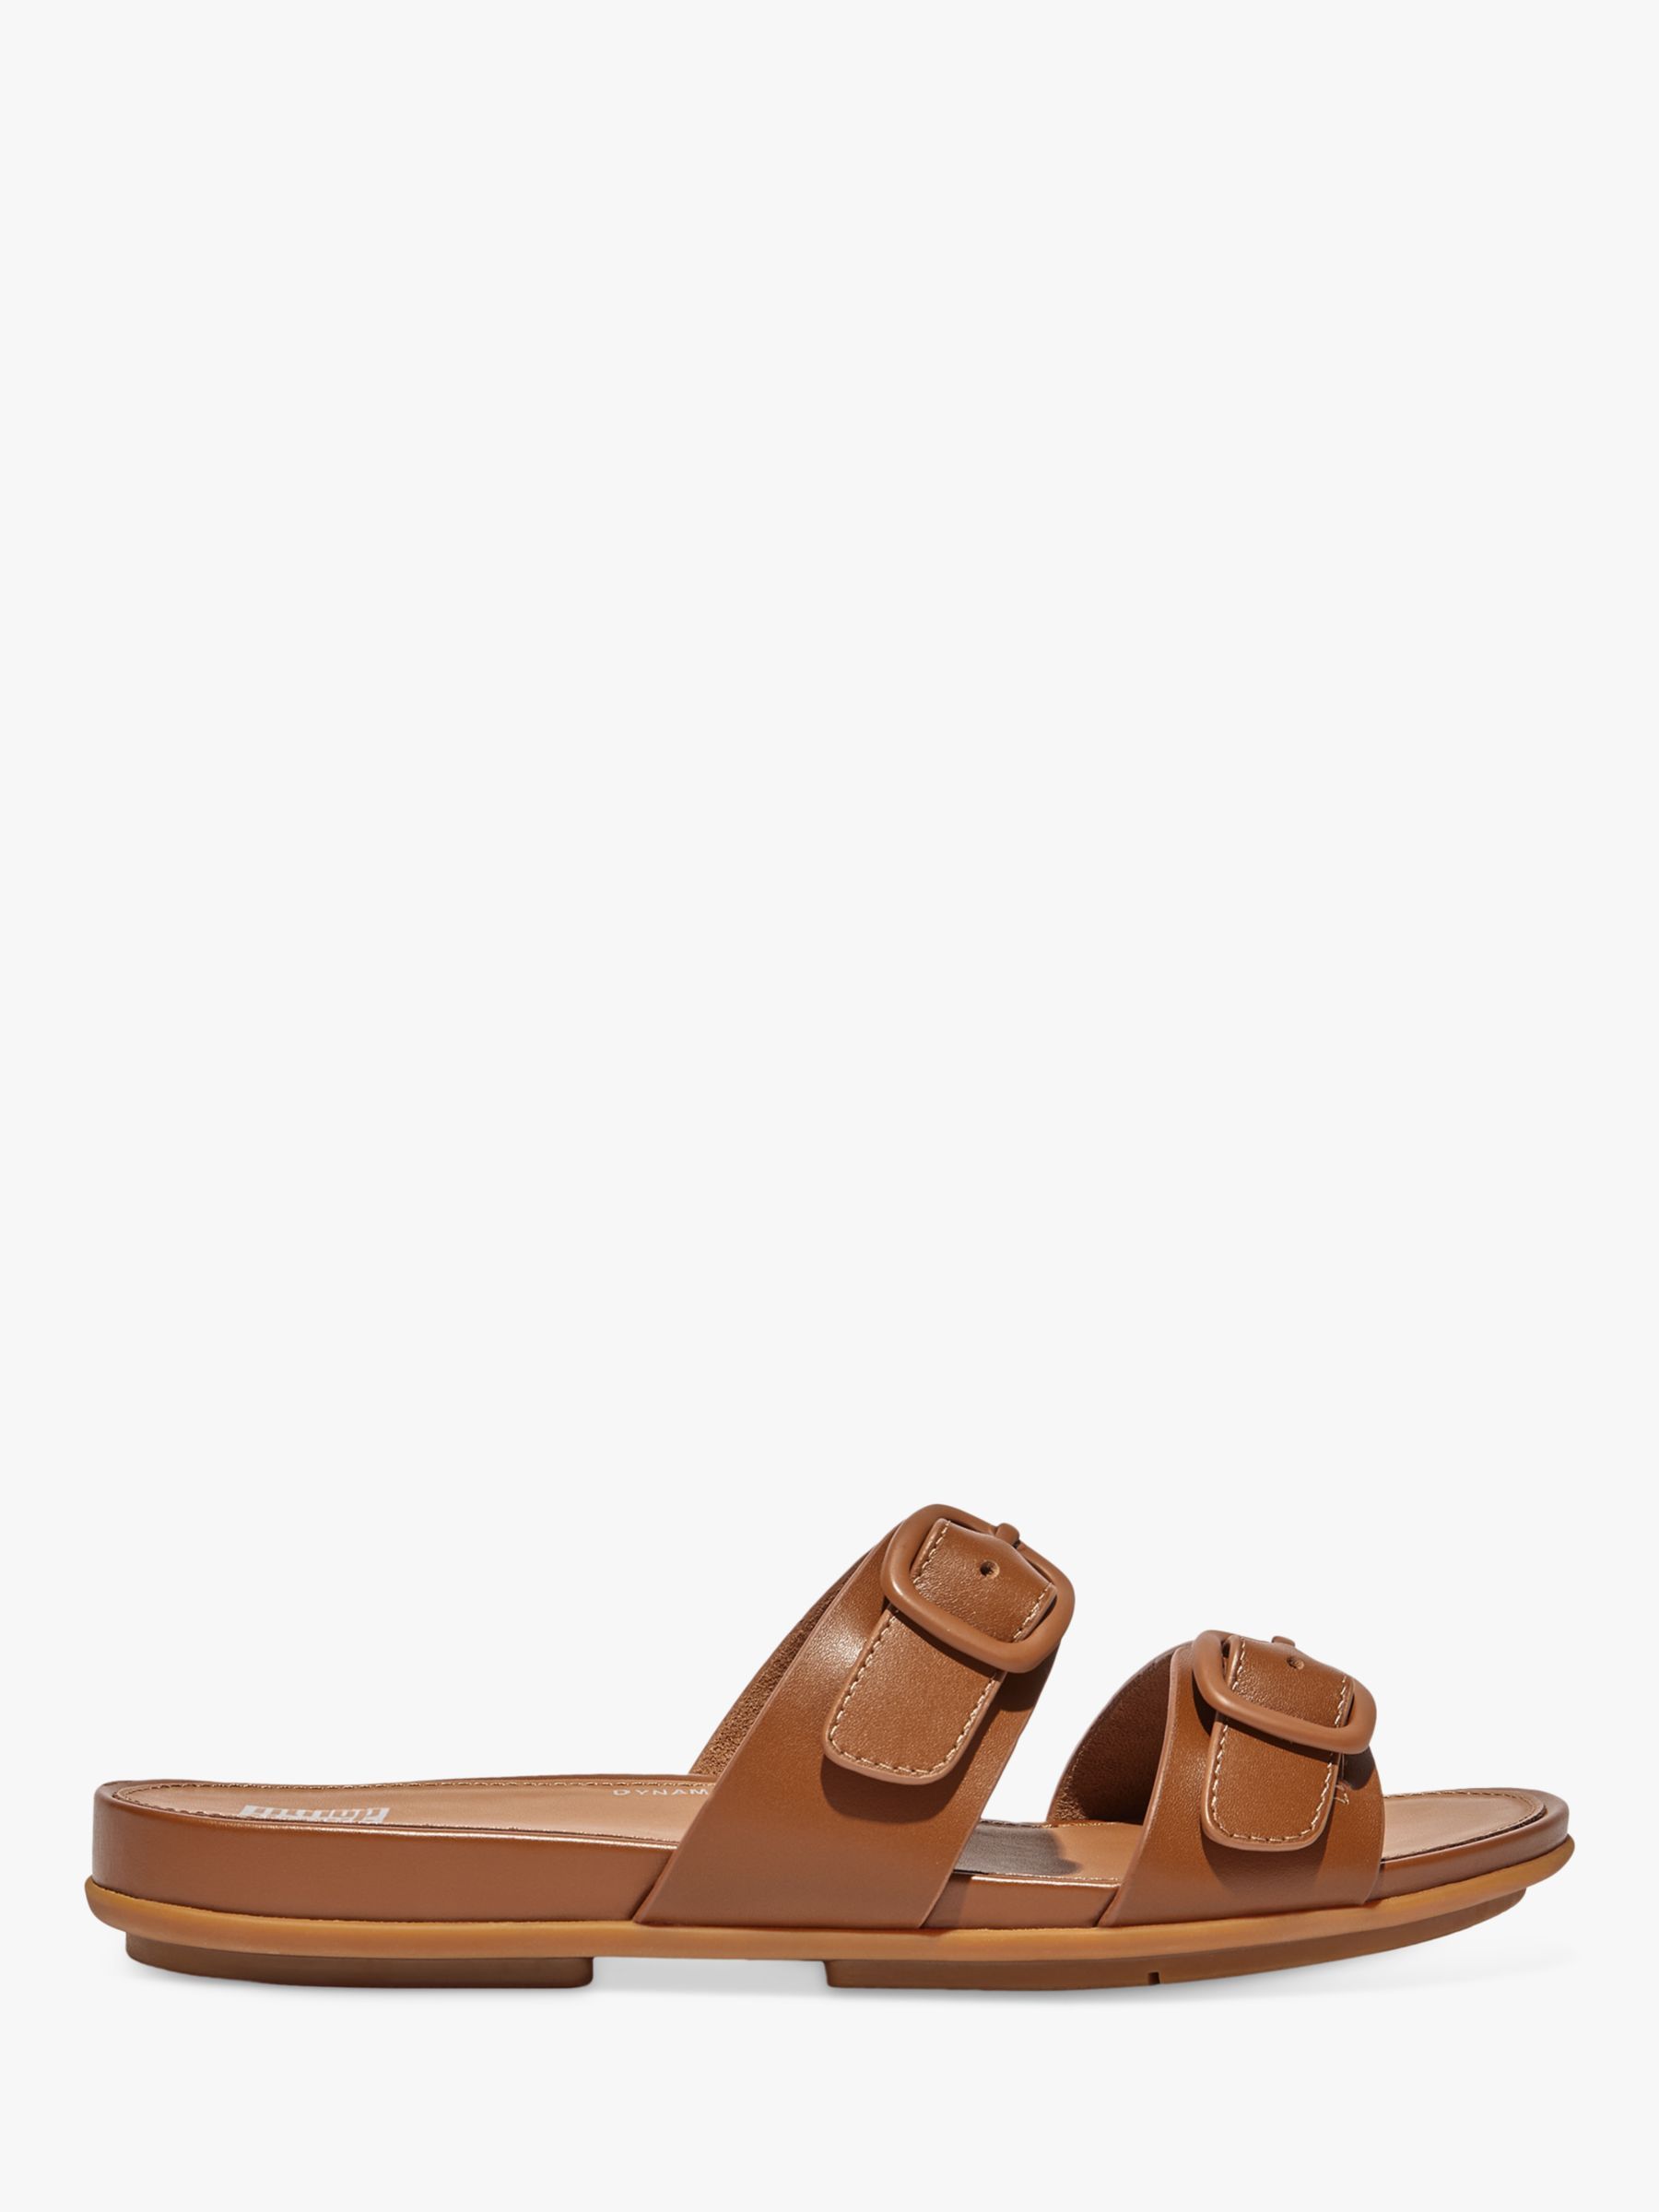 FitFlop Gracie Leather Two Strap Slider Sandals | John Lewis (UK)